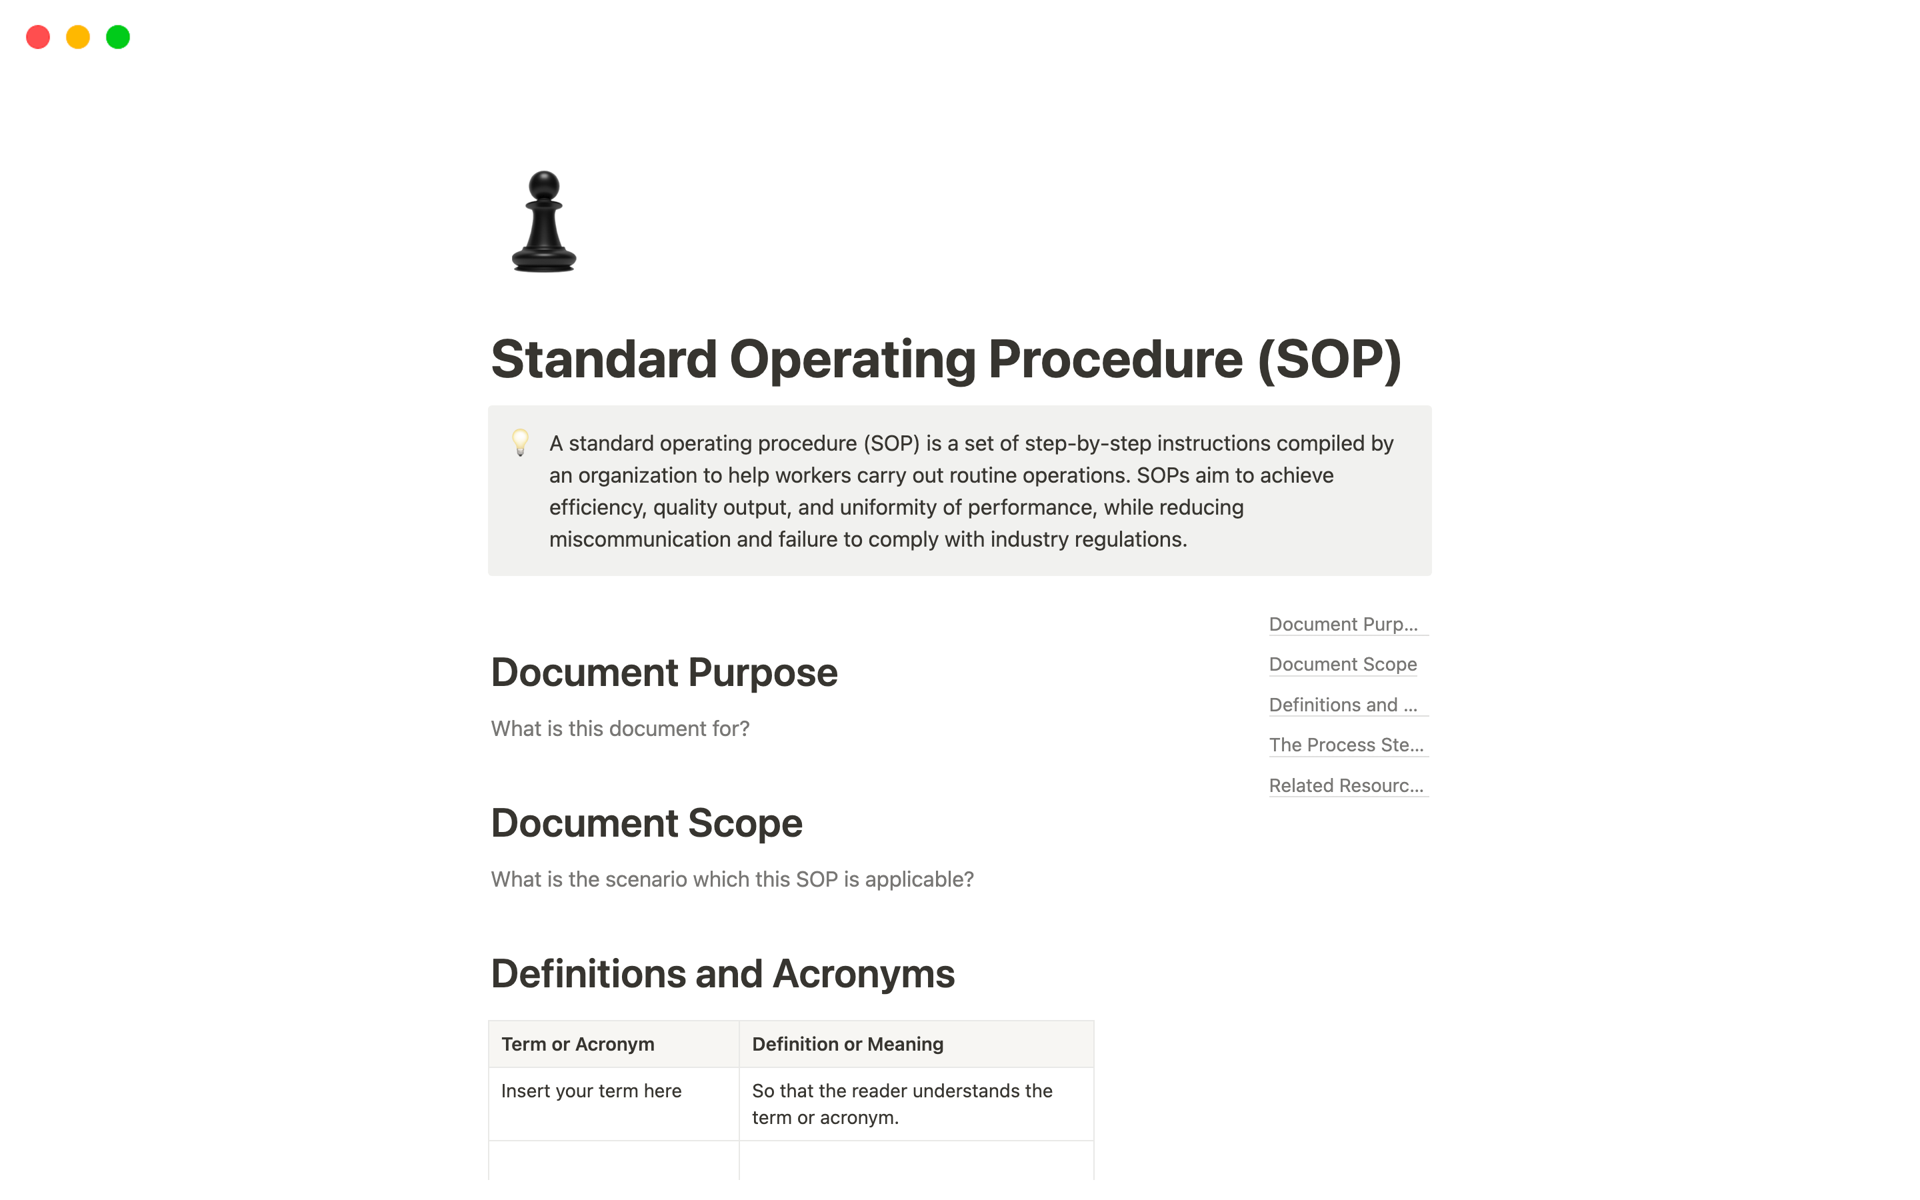 A documents for your standard operating procedures.